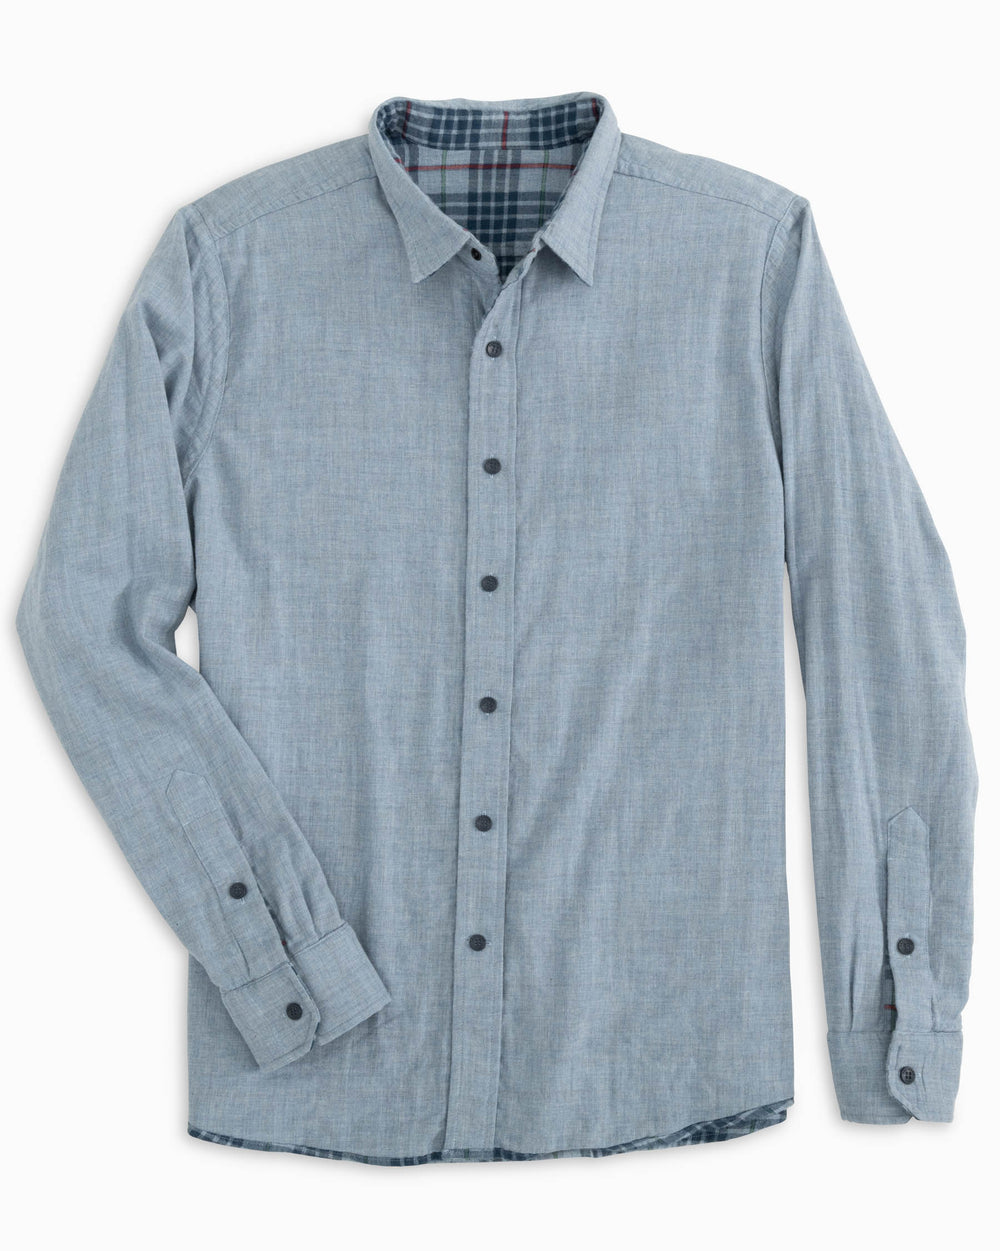 The reverse view of the Southern Tide Payton Heather Reversible Plaid Sport Shirt by Southern Tide - Heather Dolphin Gray